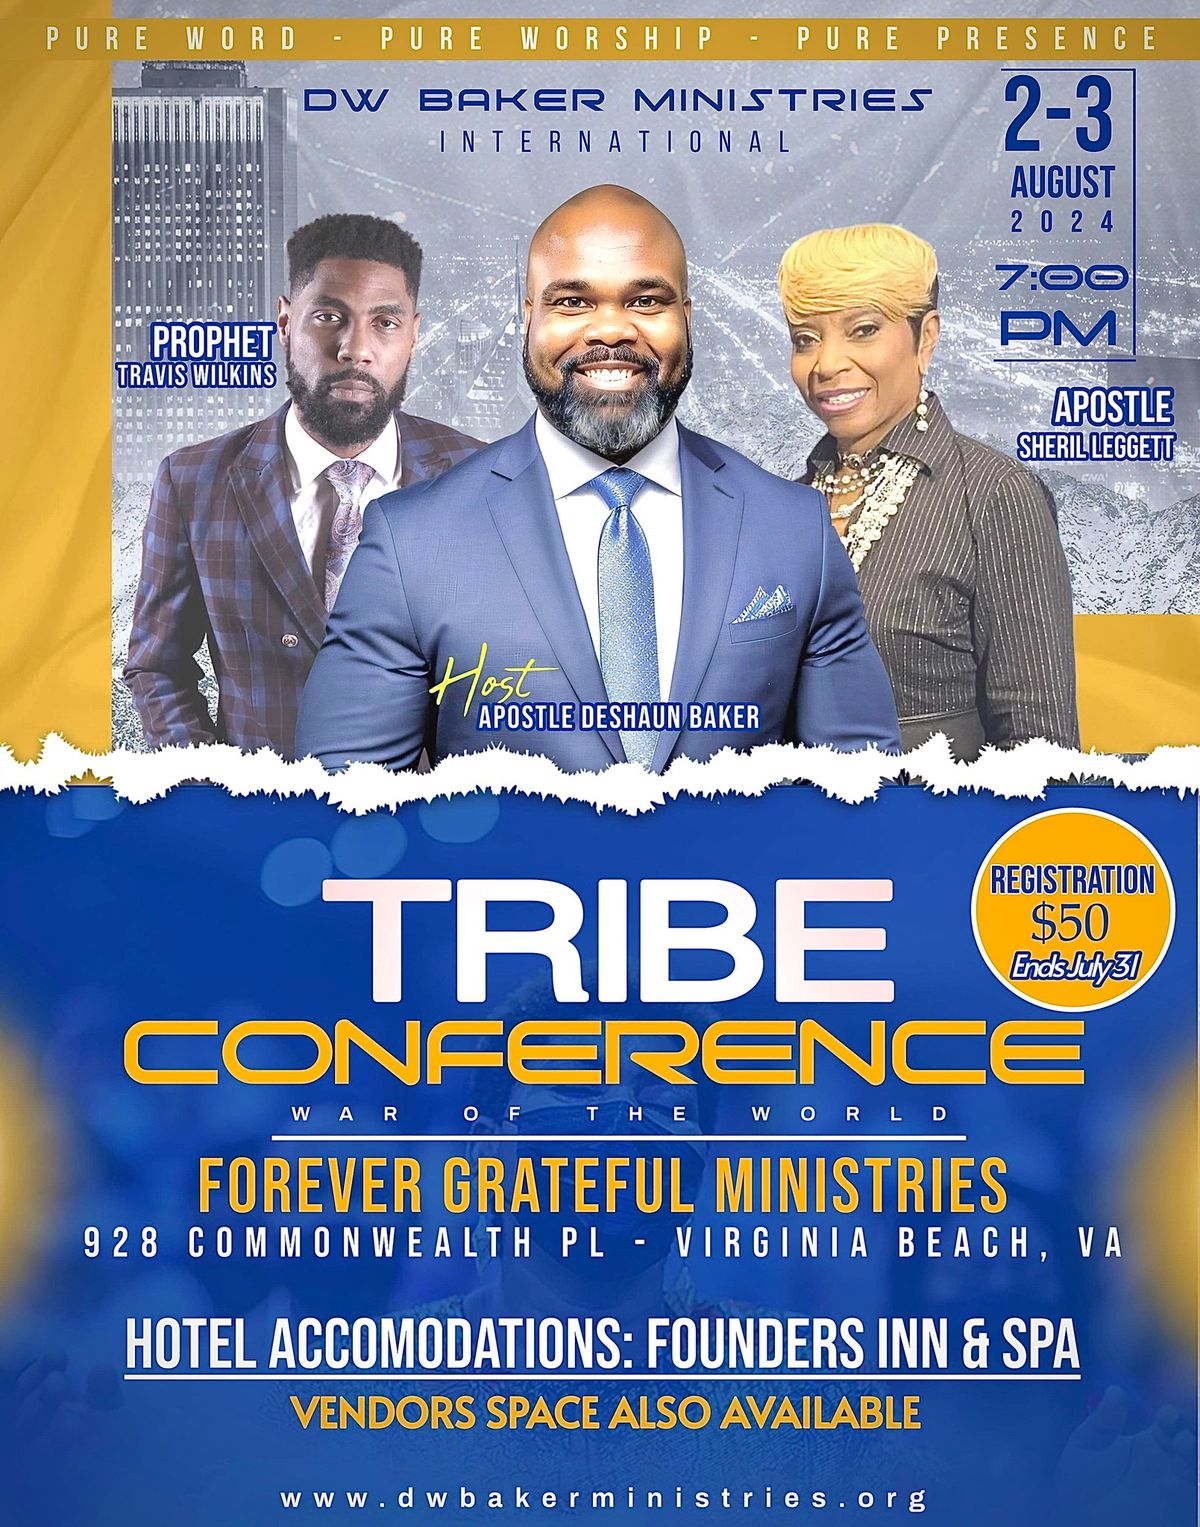 TRIBE CONFERENCE 2K24